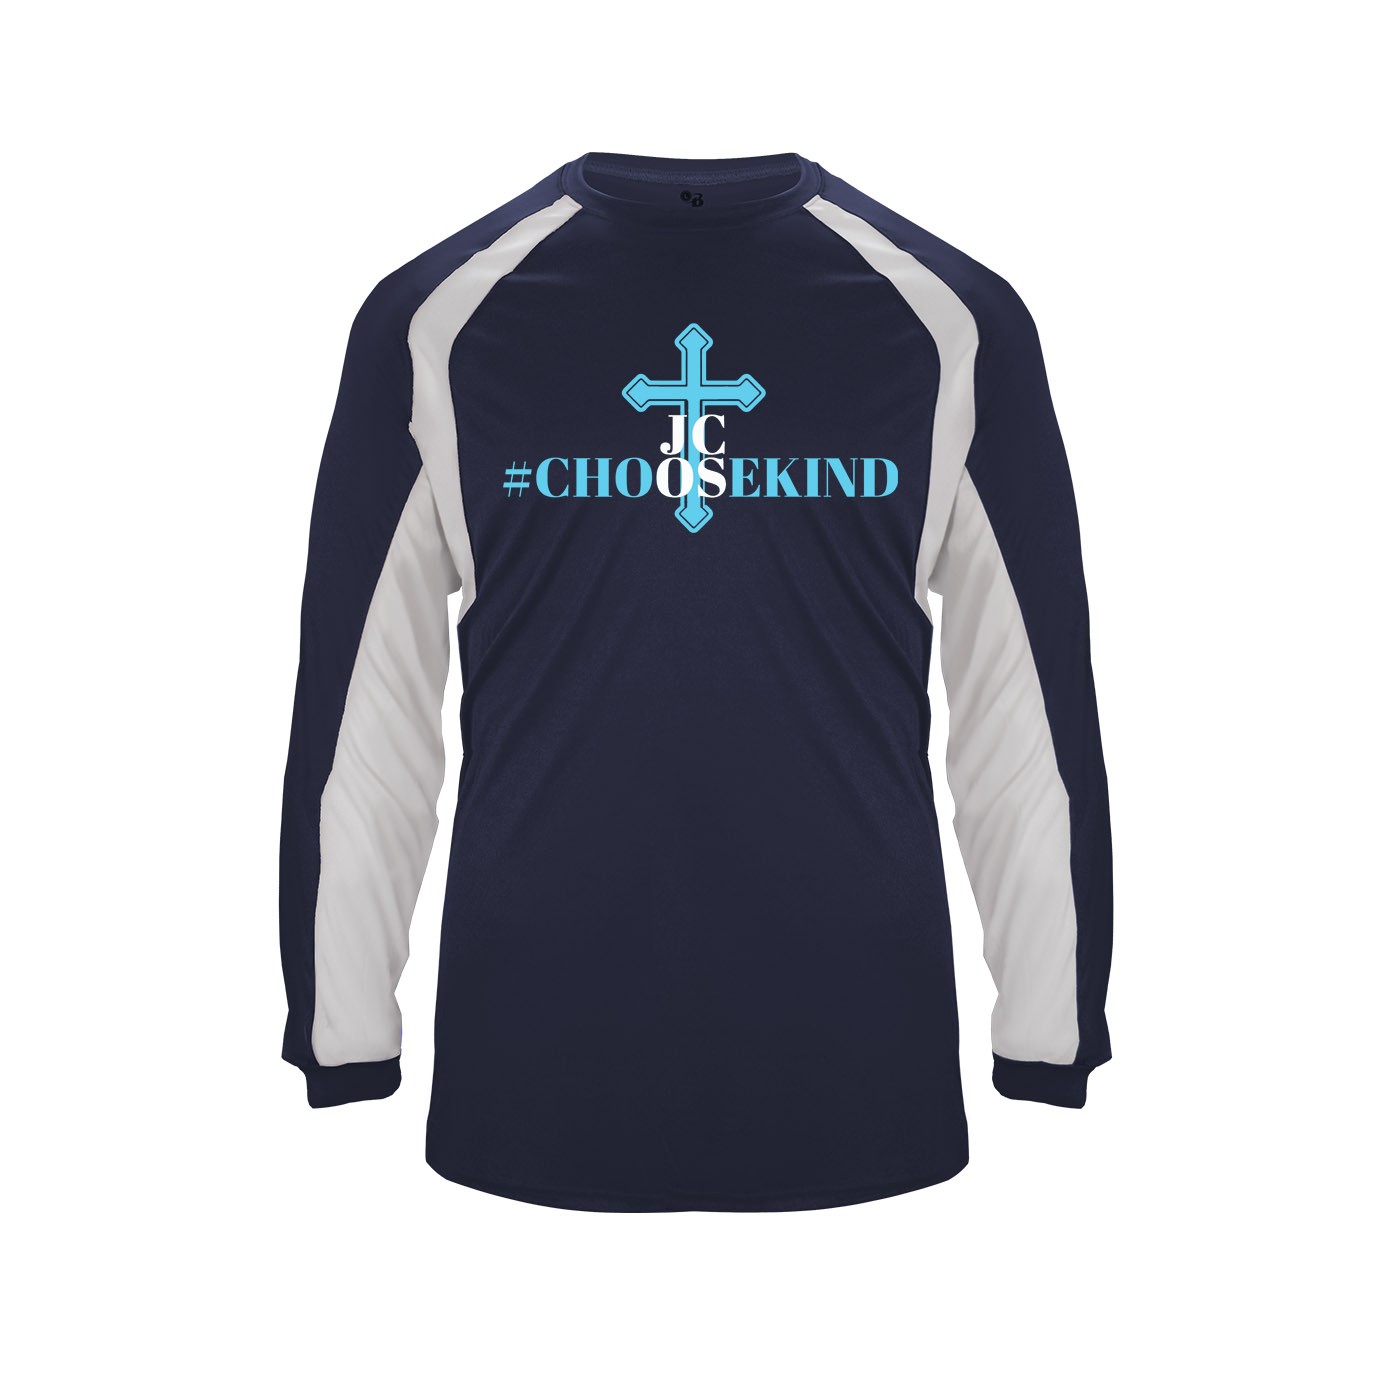 JCOS Staff Hook L/S T-Shirt w/ Choose Kind Logo #F39 - Please Allow 3-4 Weeks for Delivery